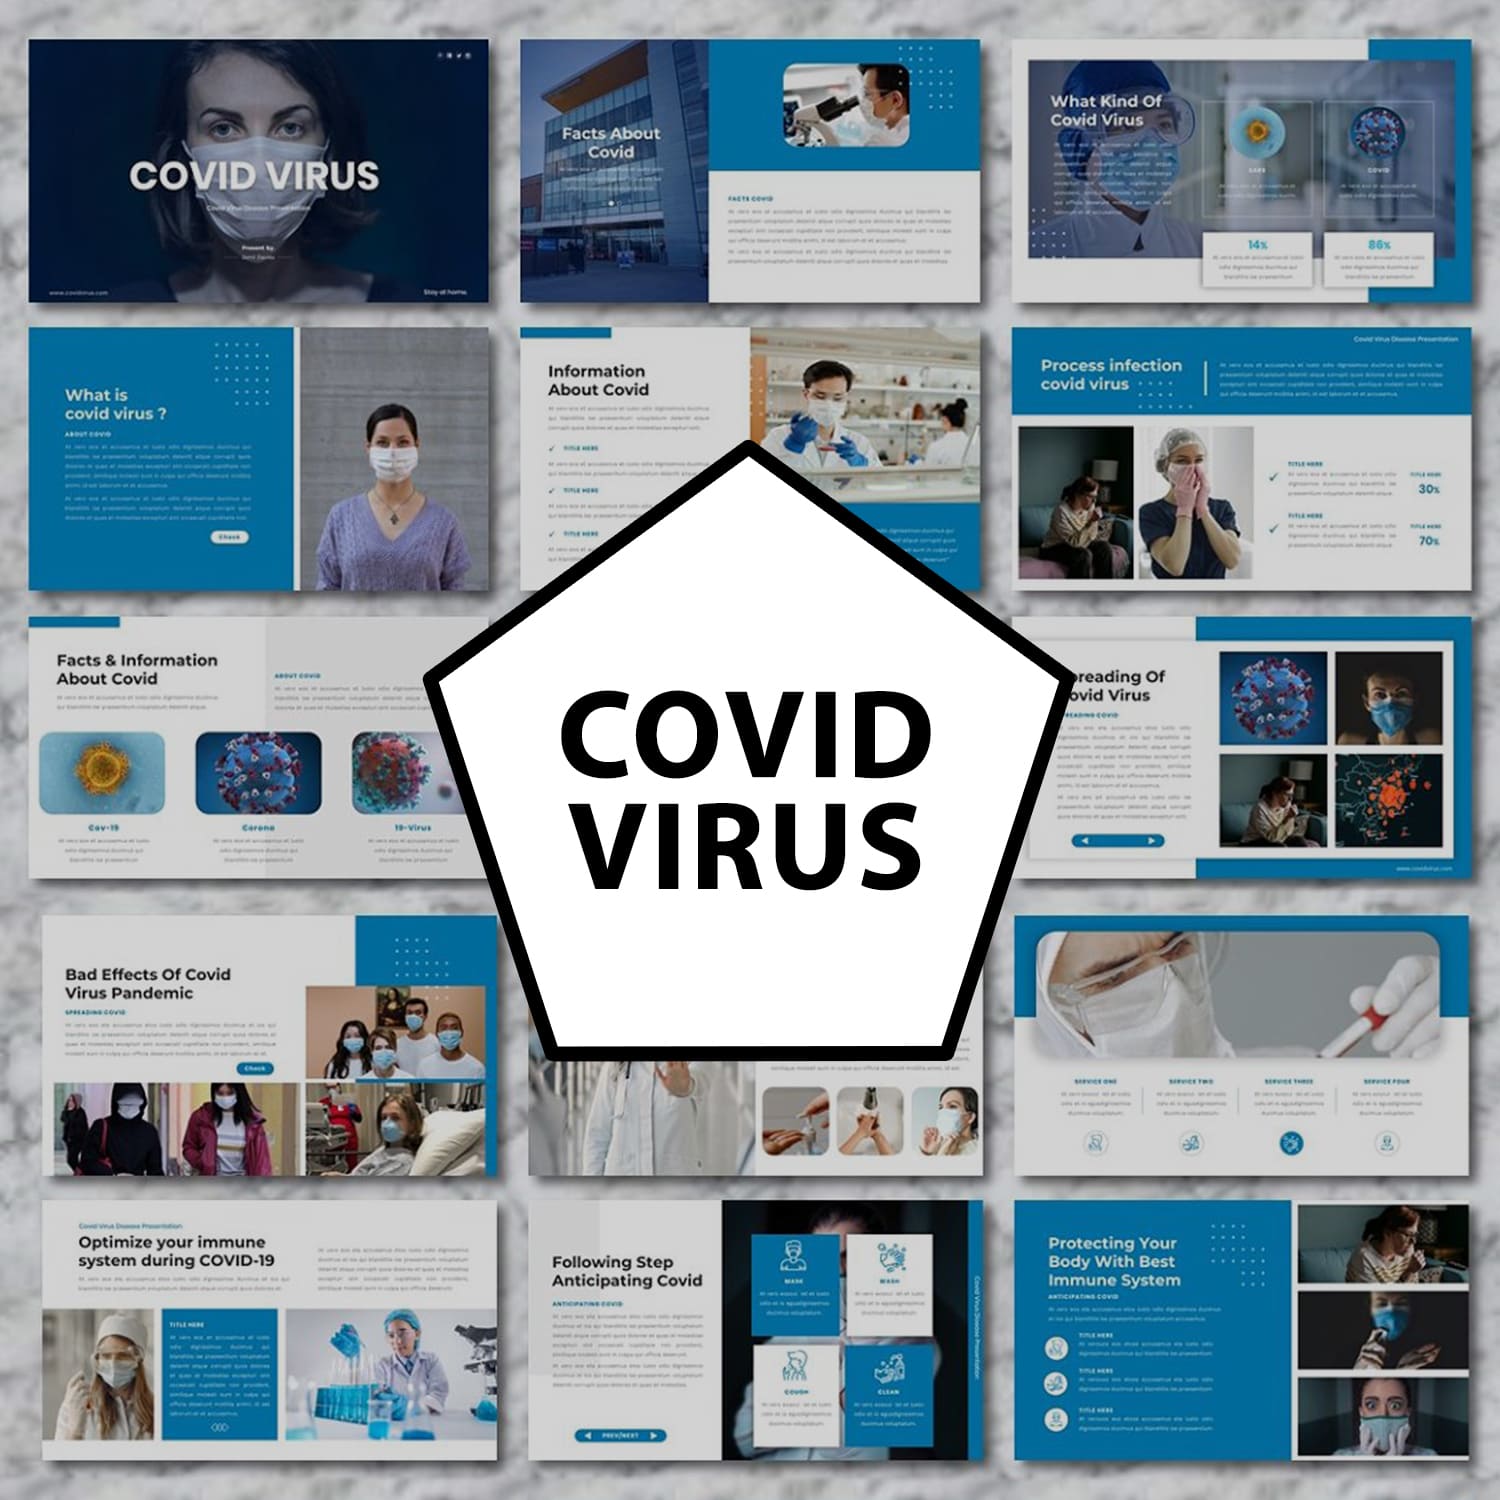 Covid Virus - Medical PowerPoint main cover.